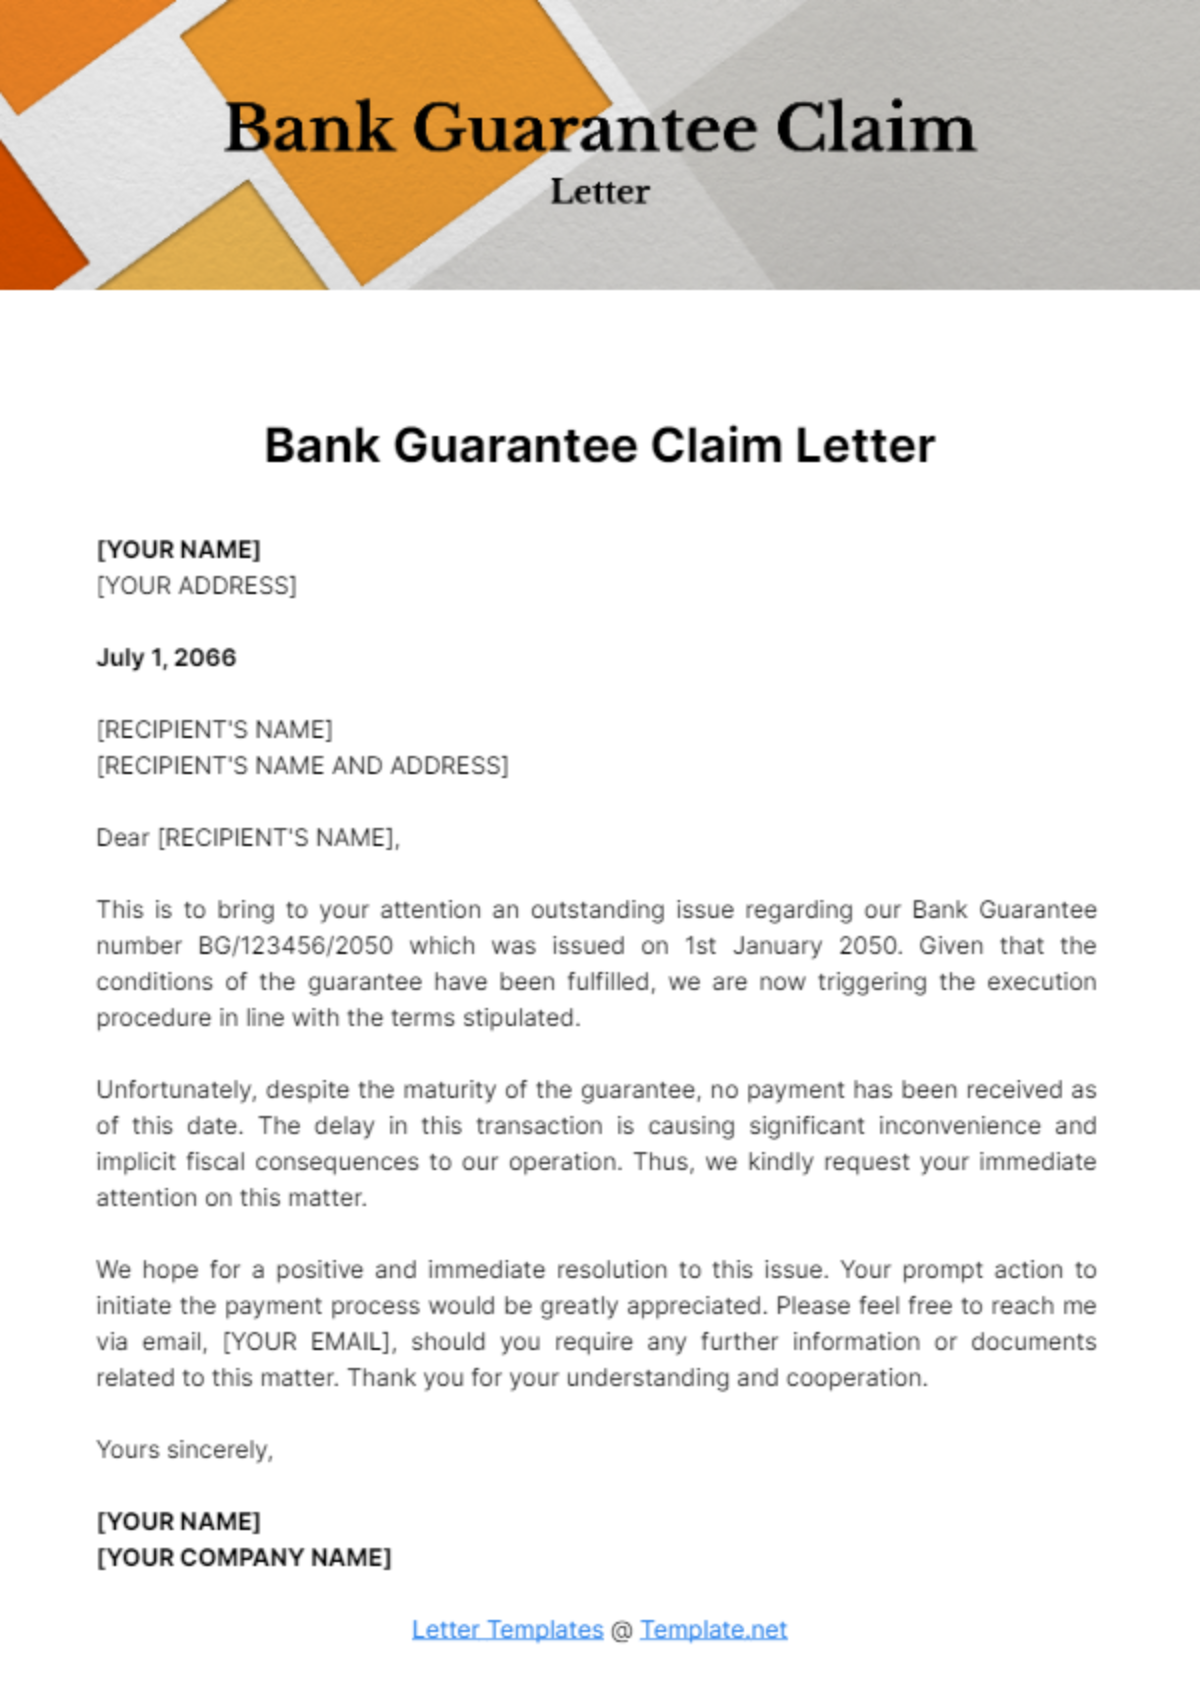 Free Bank Guarantee Claim Letter Template